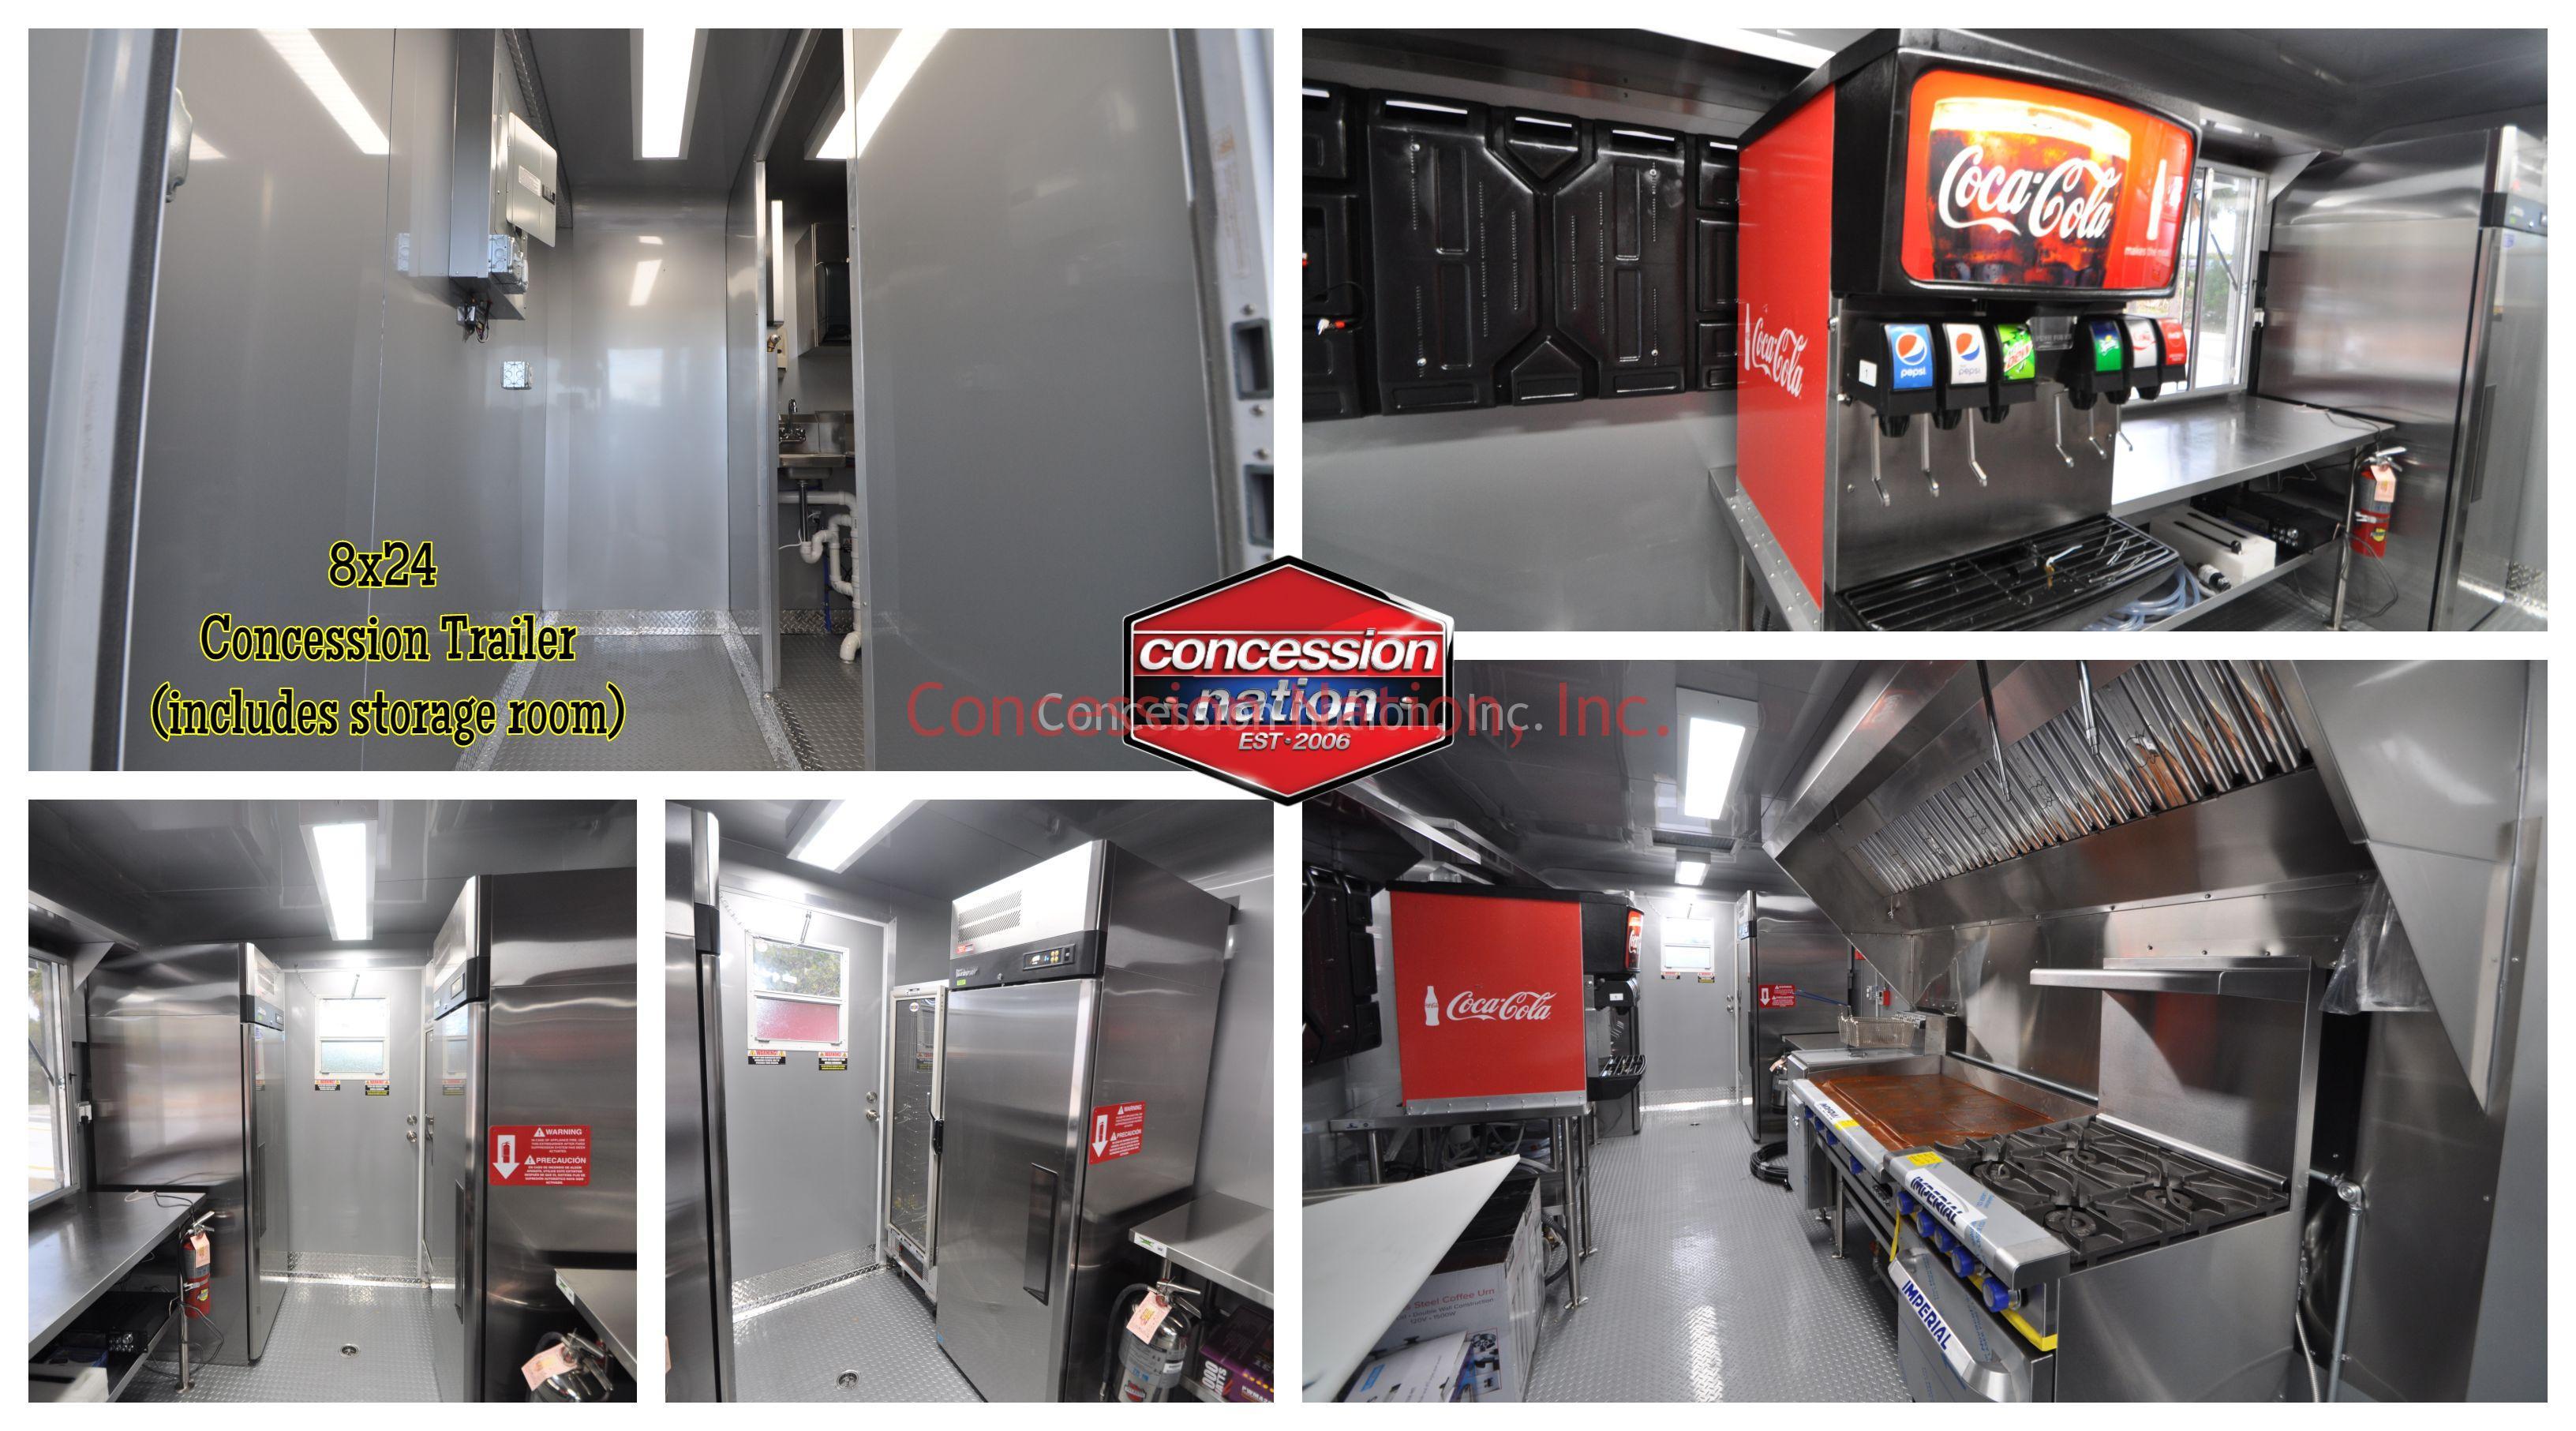 Concession Trailer with storage